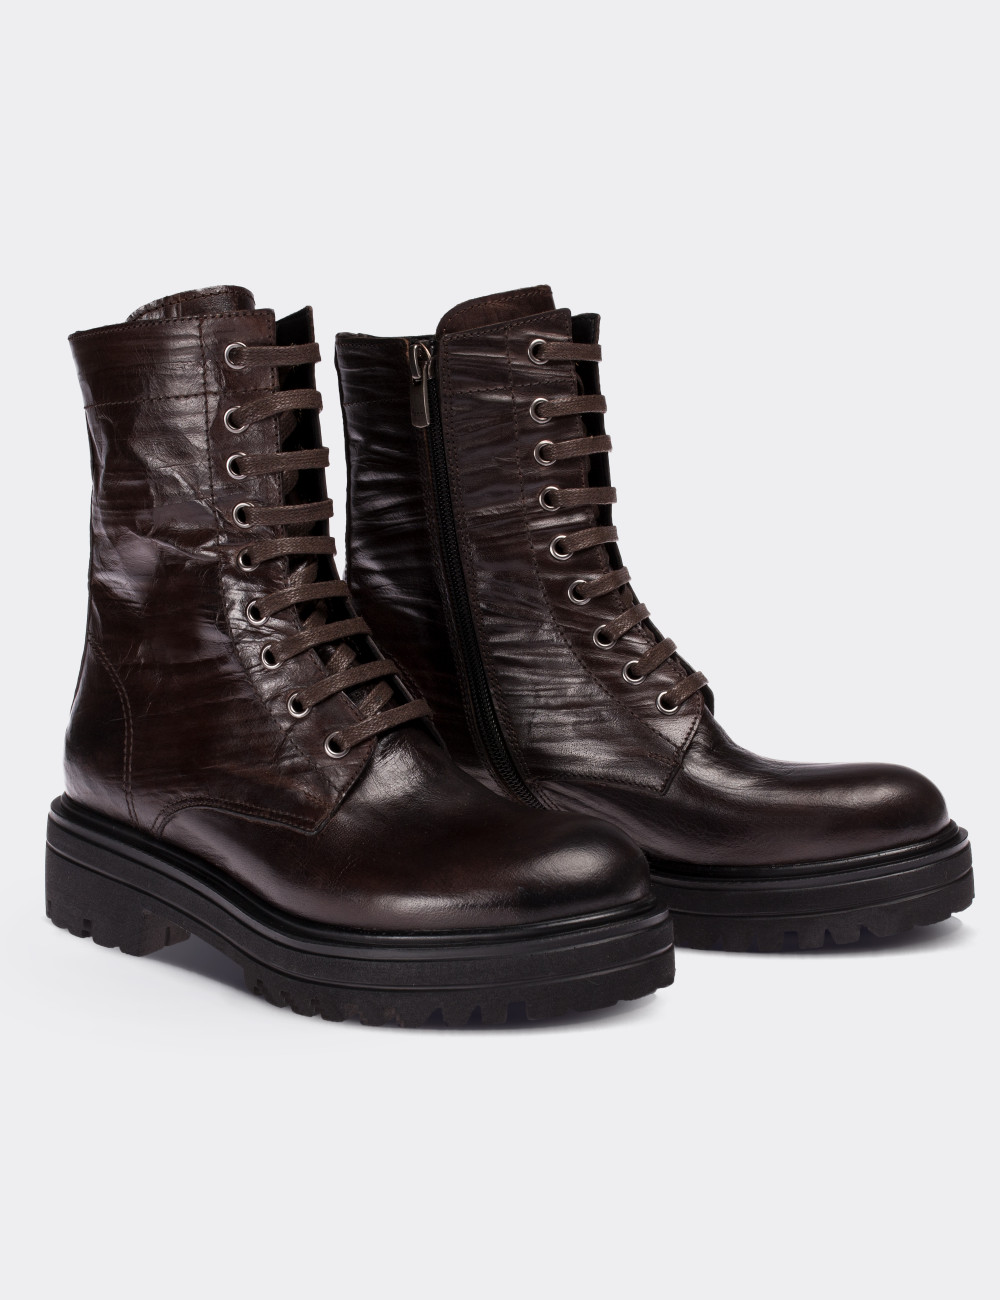 Brown  Leather Postal Boots - 01803ZKHVE01